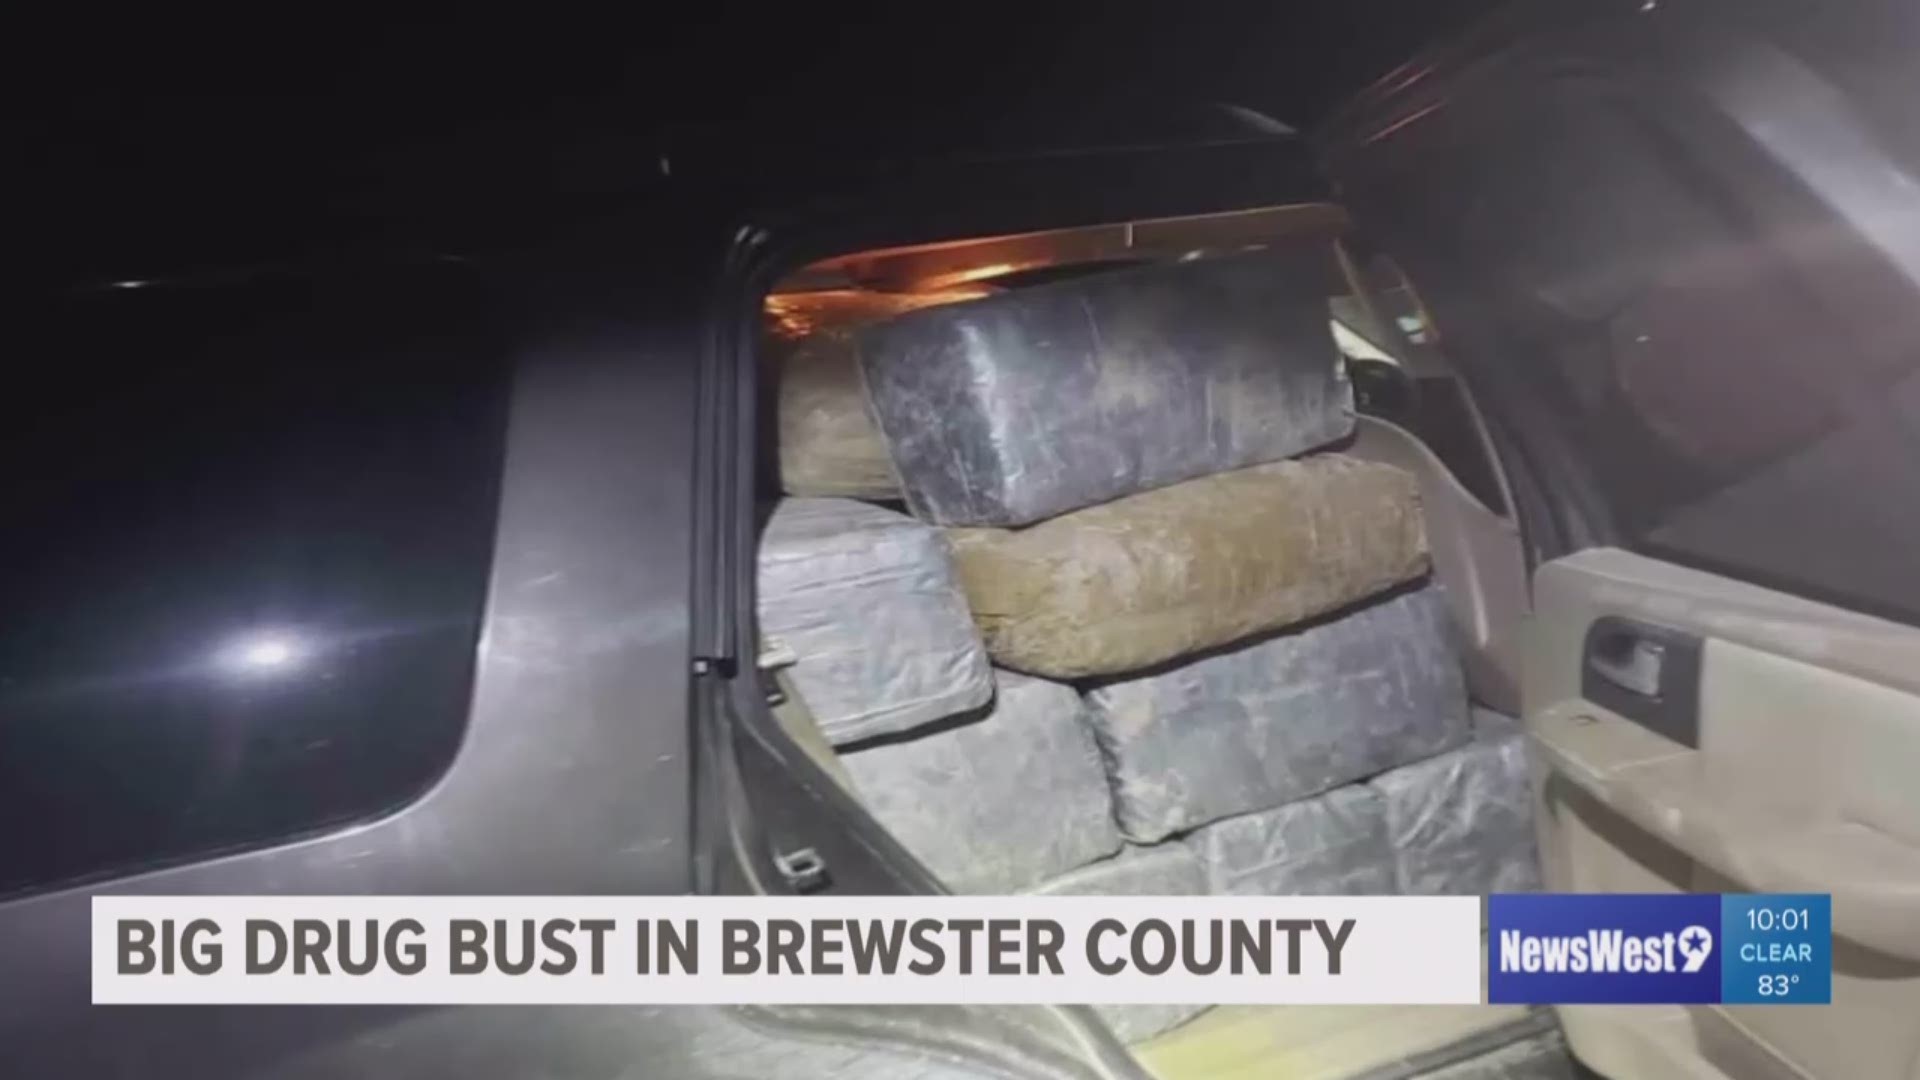 Early Saturday morning, deputies of the Brewster County Sheriff's Office and US Border Patrol Agents recovered approximately 1,127 pounds of marijuana in an abandoned SUV near Highway 90.